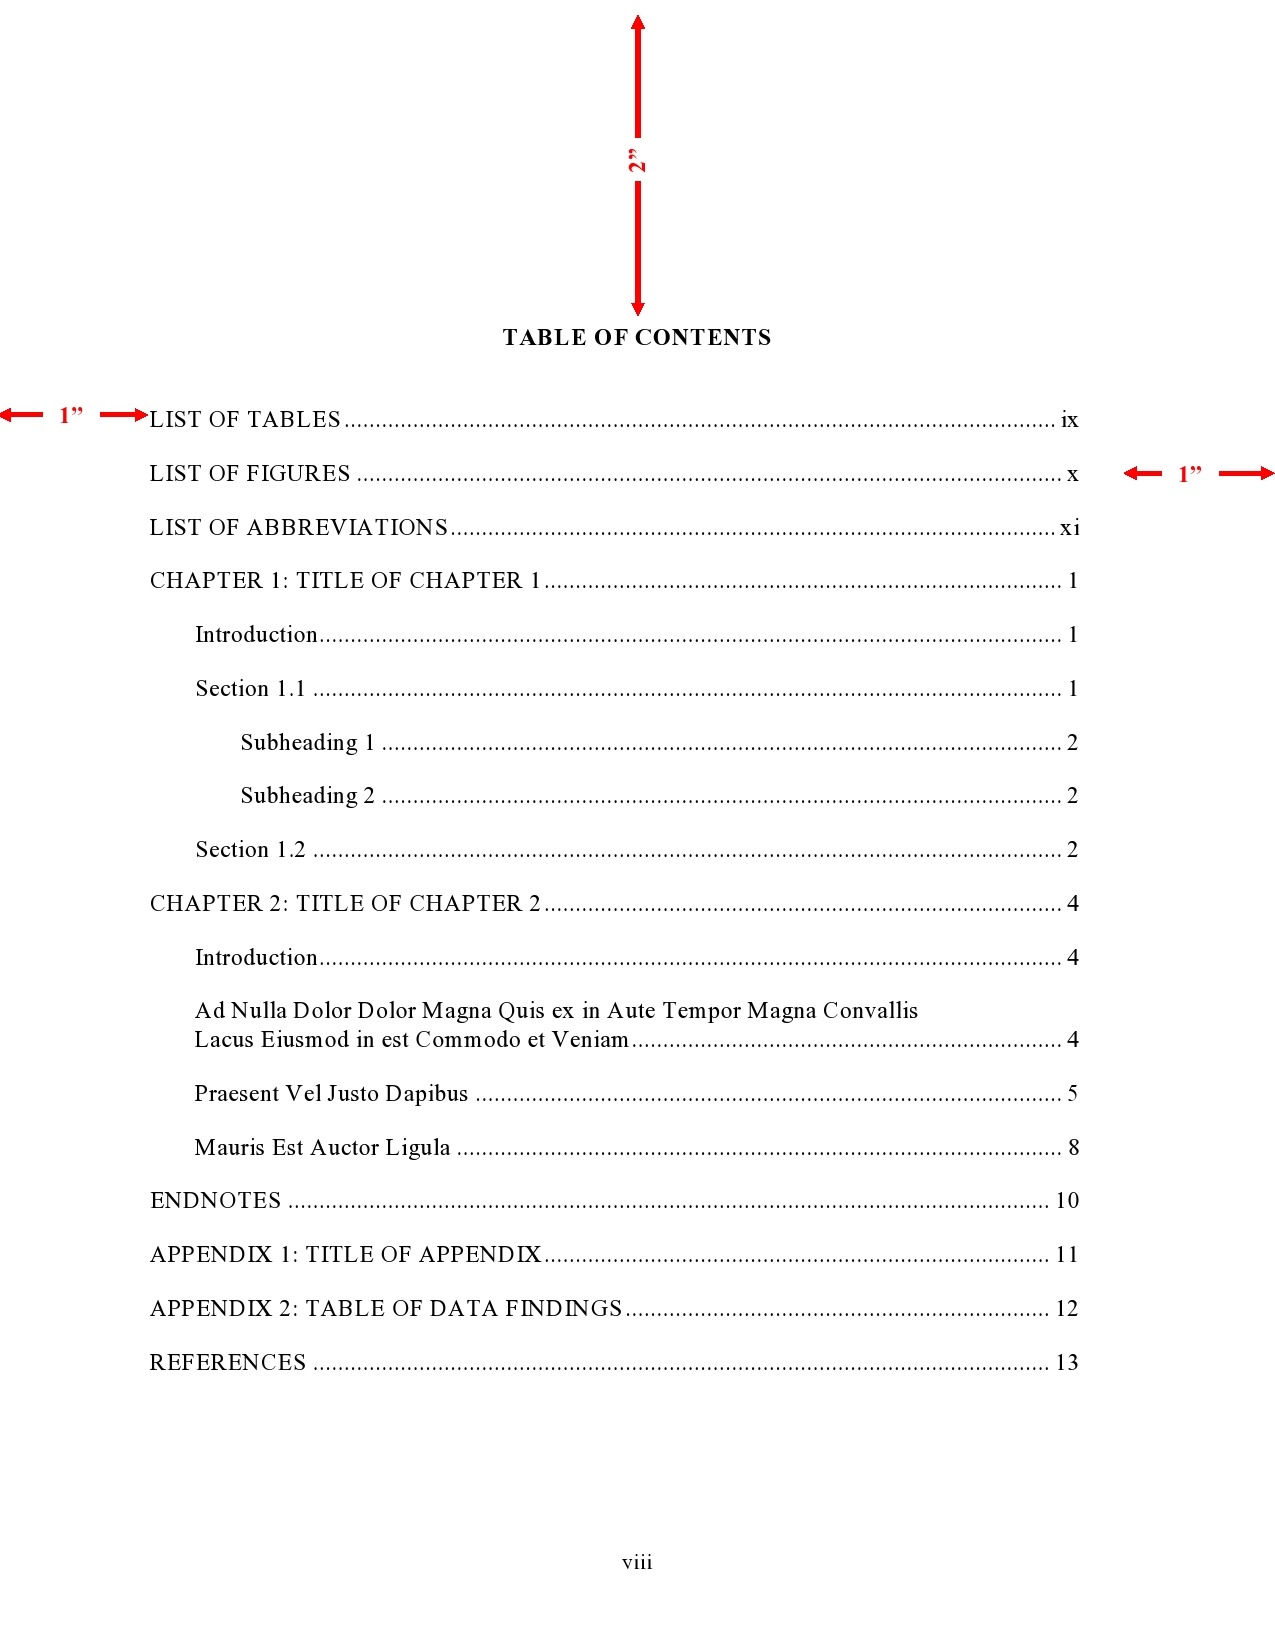 How to Create an APA Table of Contents | Format & Examples